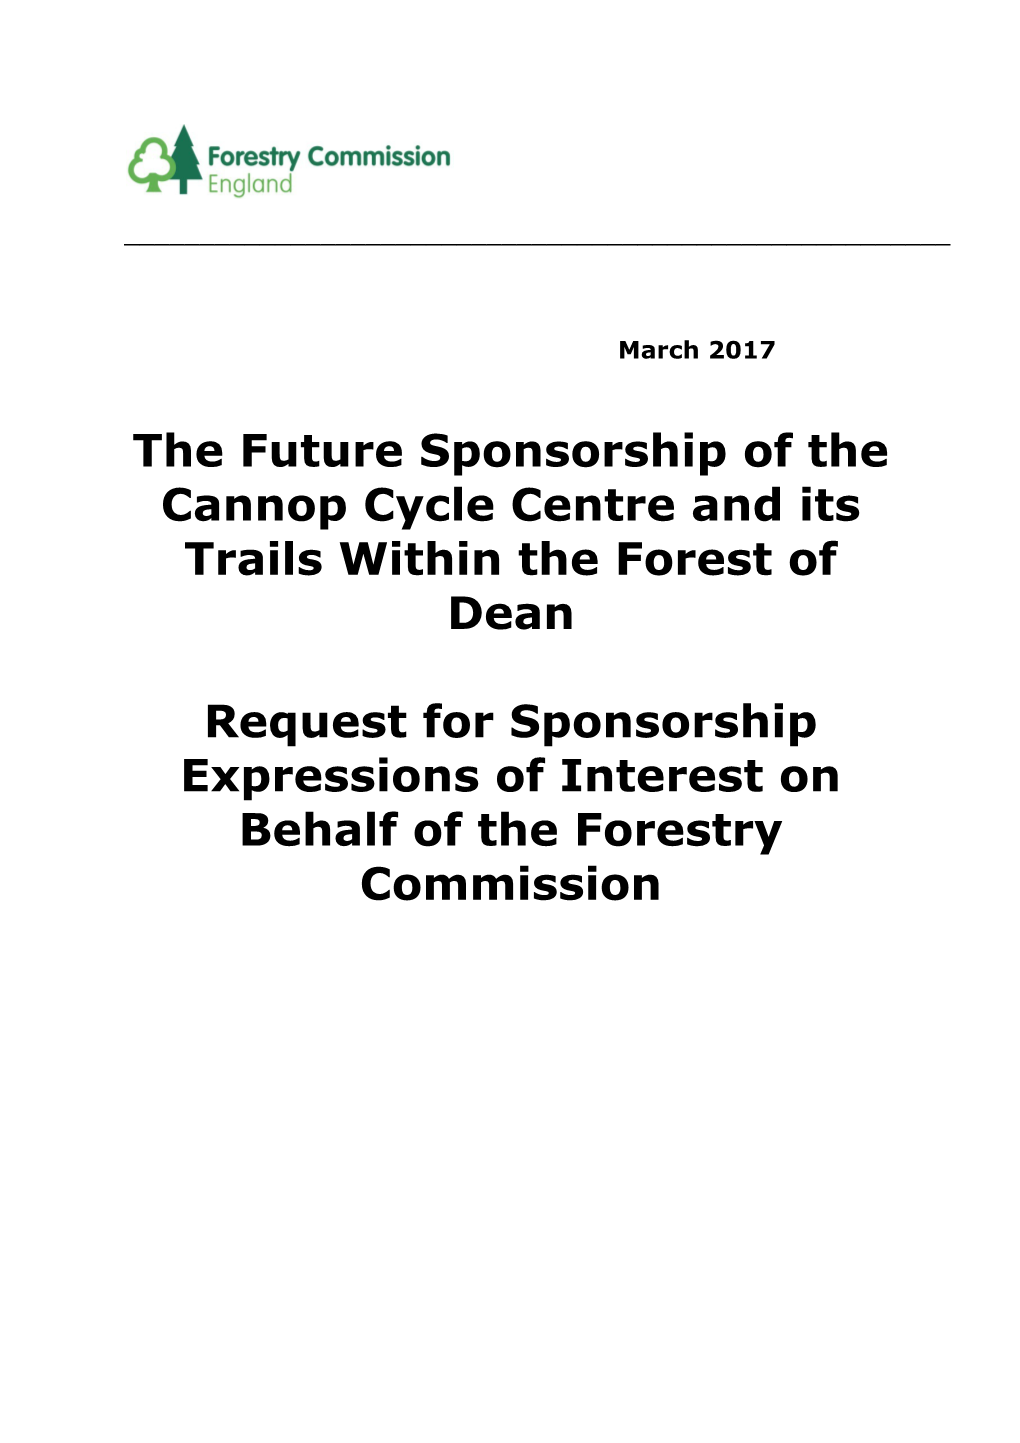 Request for Sponsorship Expressions of Interest on Behalf of the Forestry Commission